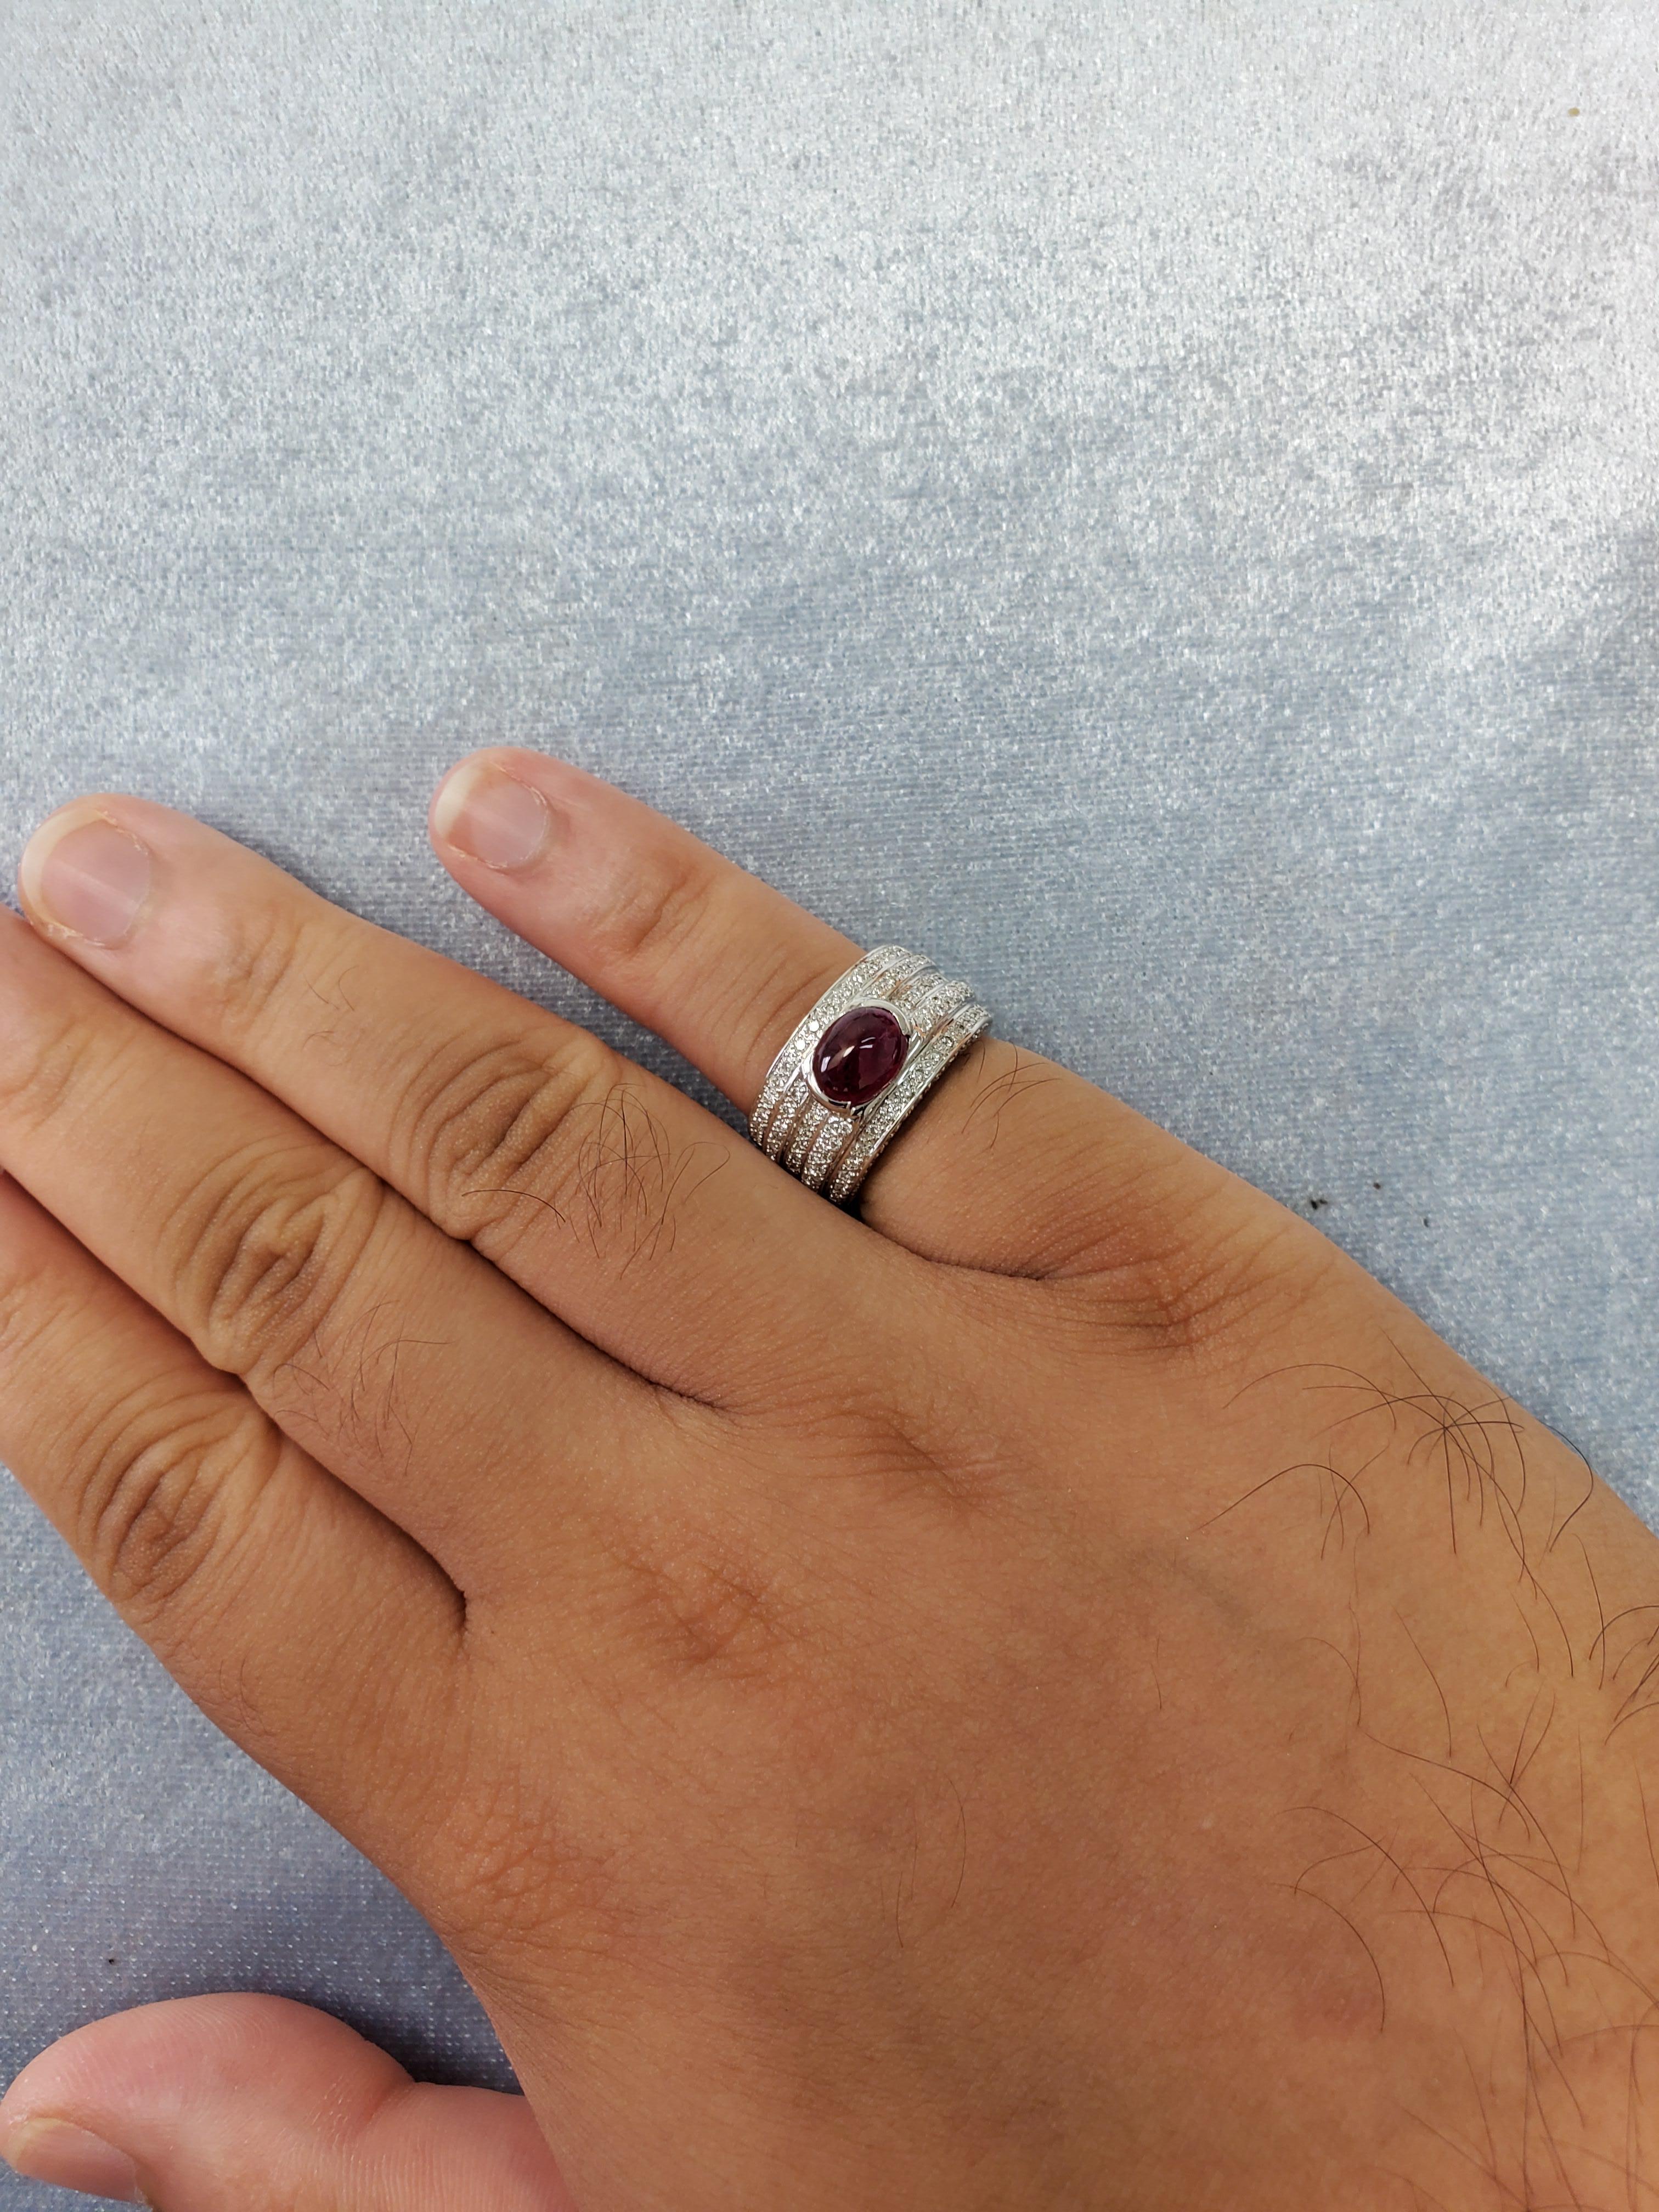 2.74 Carat Ruby Cabochon and Diamond White Gold Engagement Ring For Sale 1